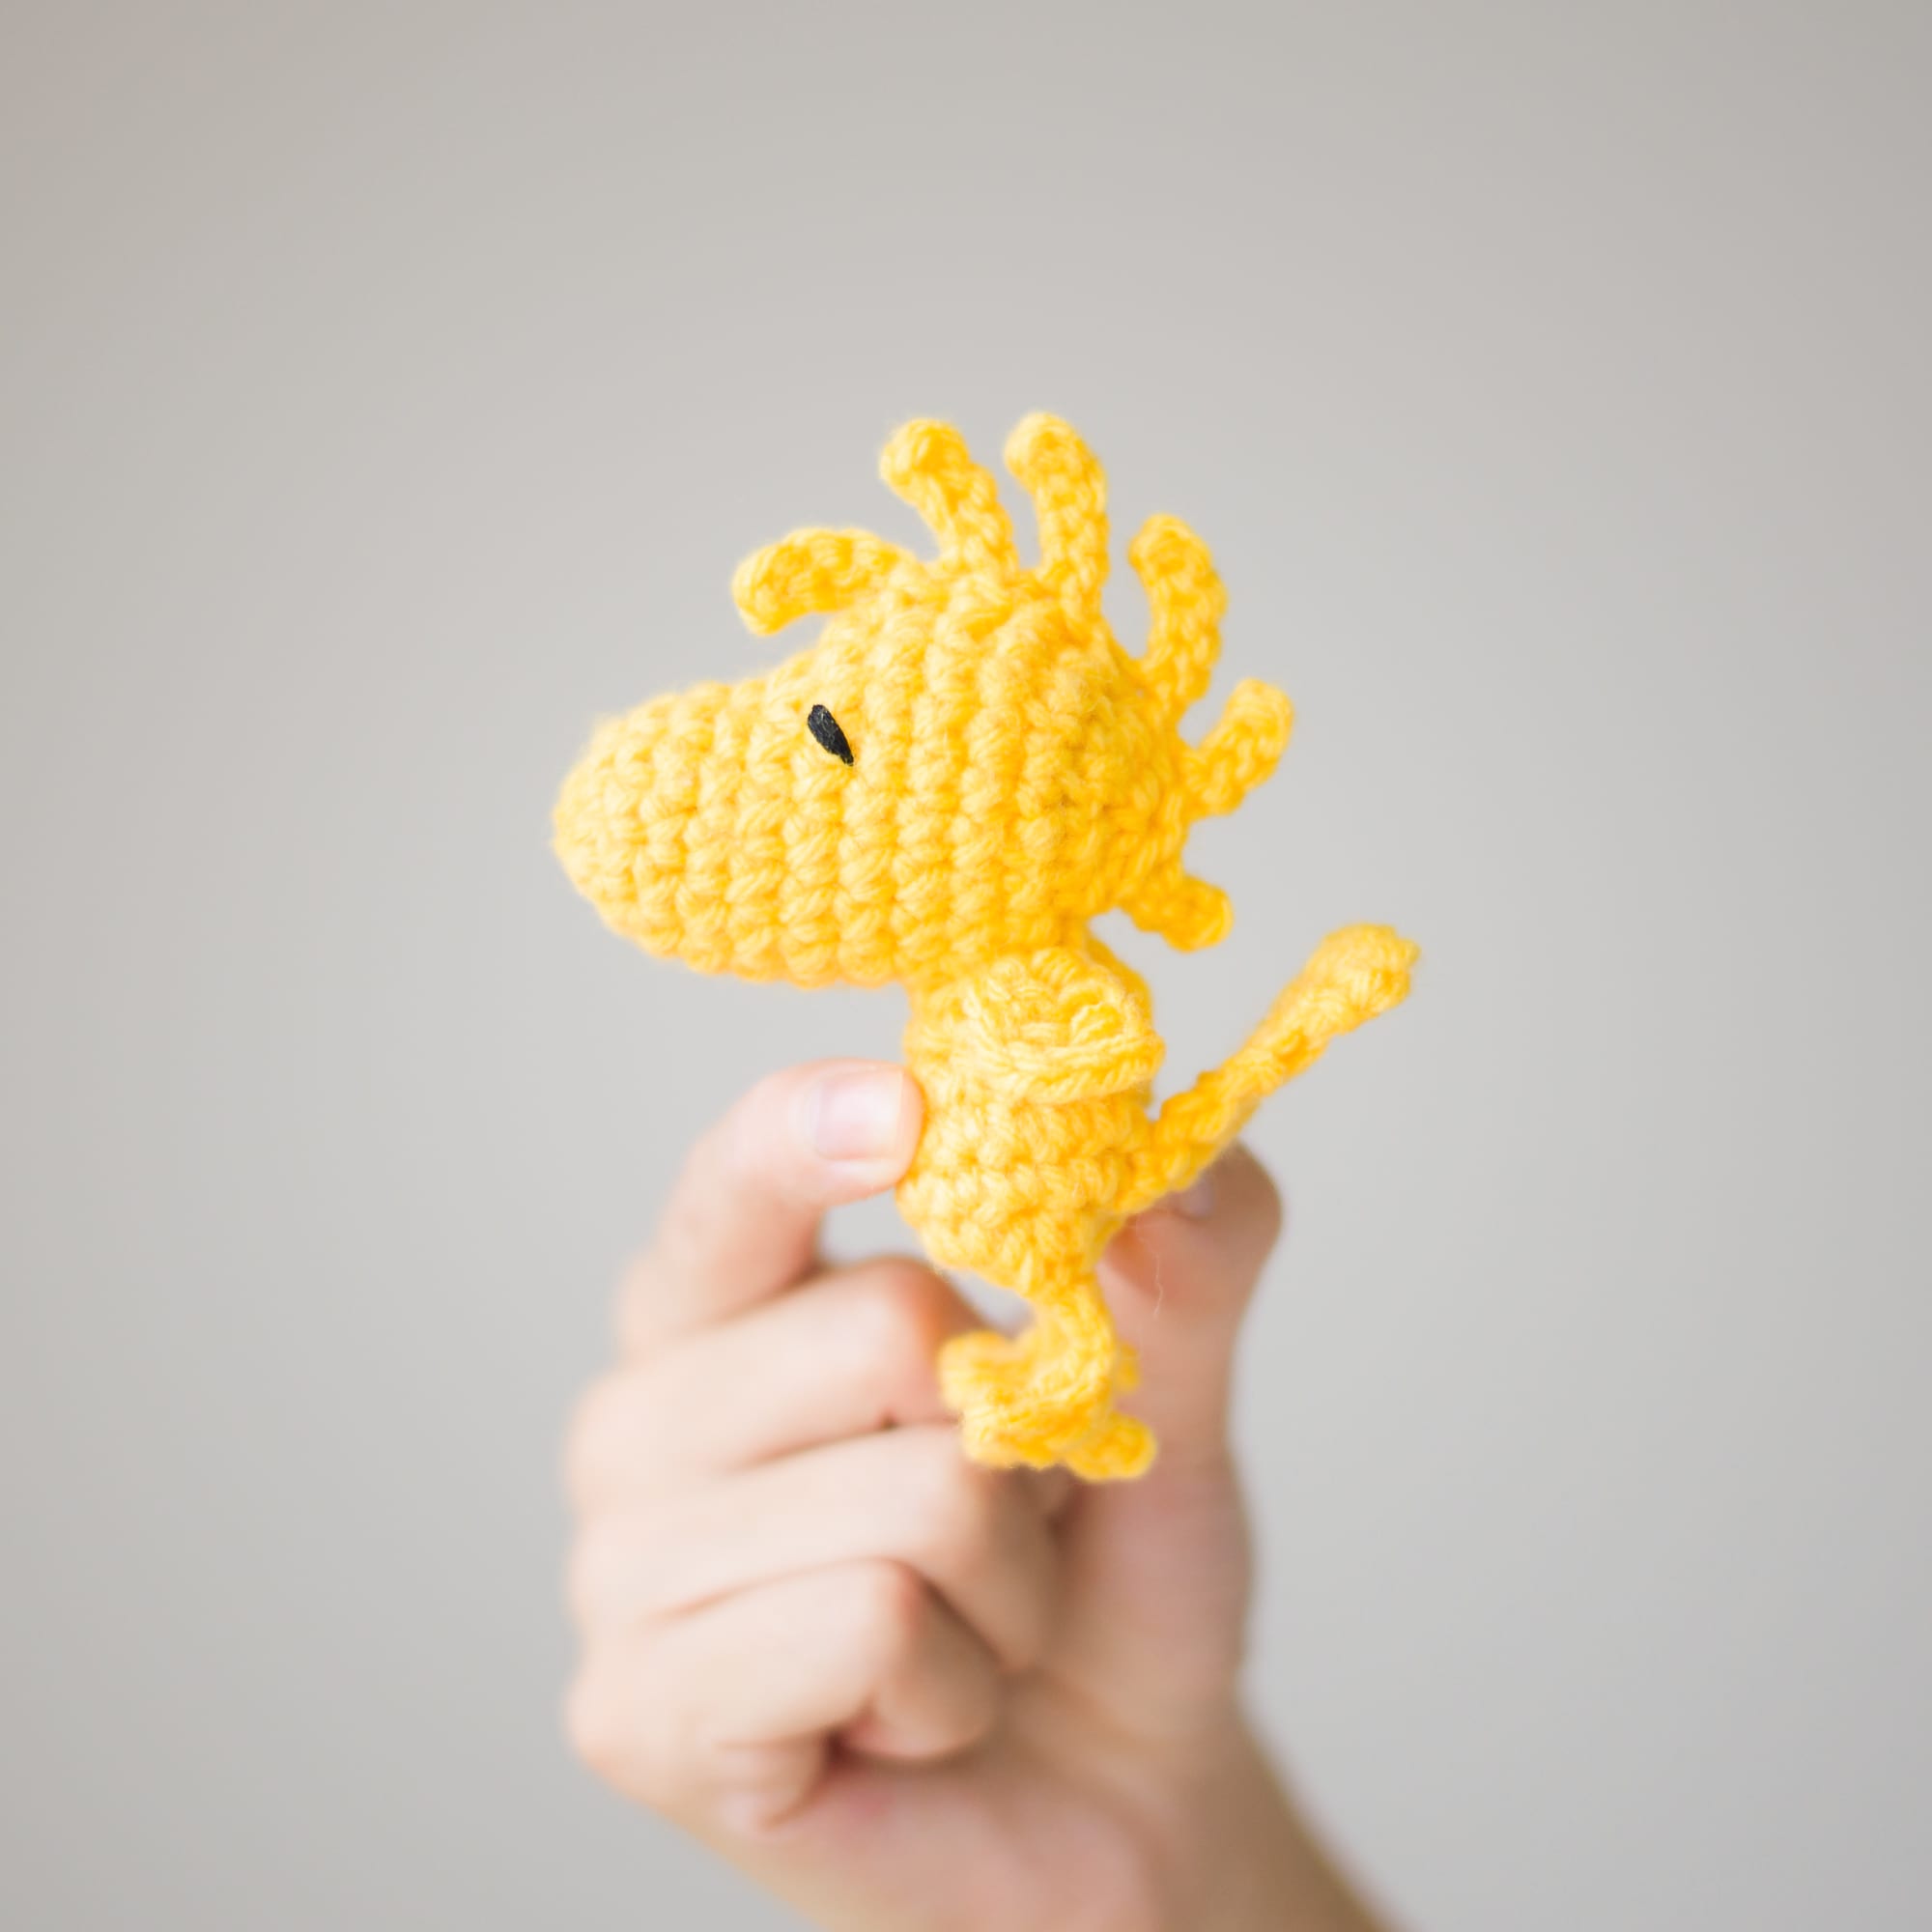 Woodstock Peanuts Crochet Kit Review Giveaway All About Ami